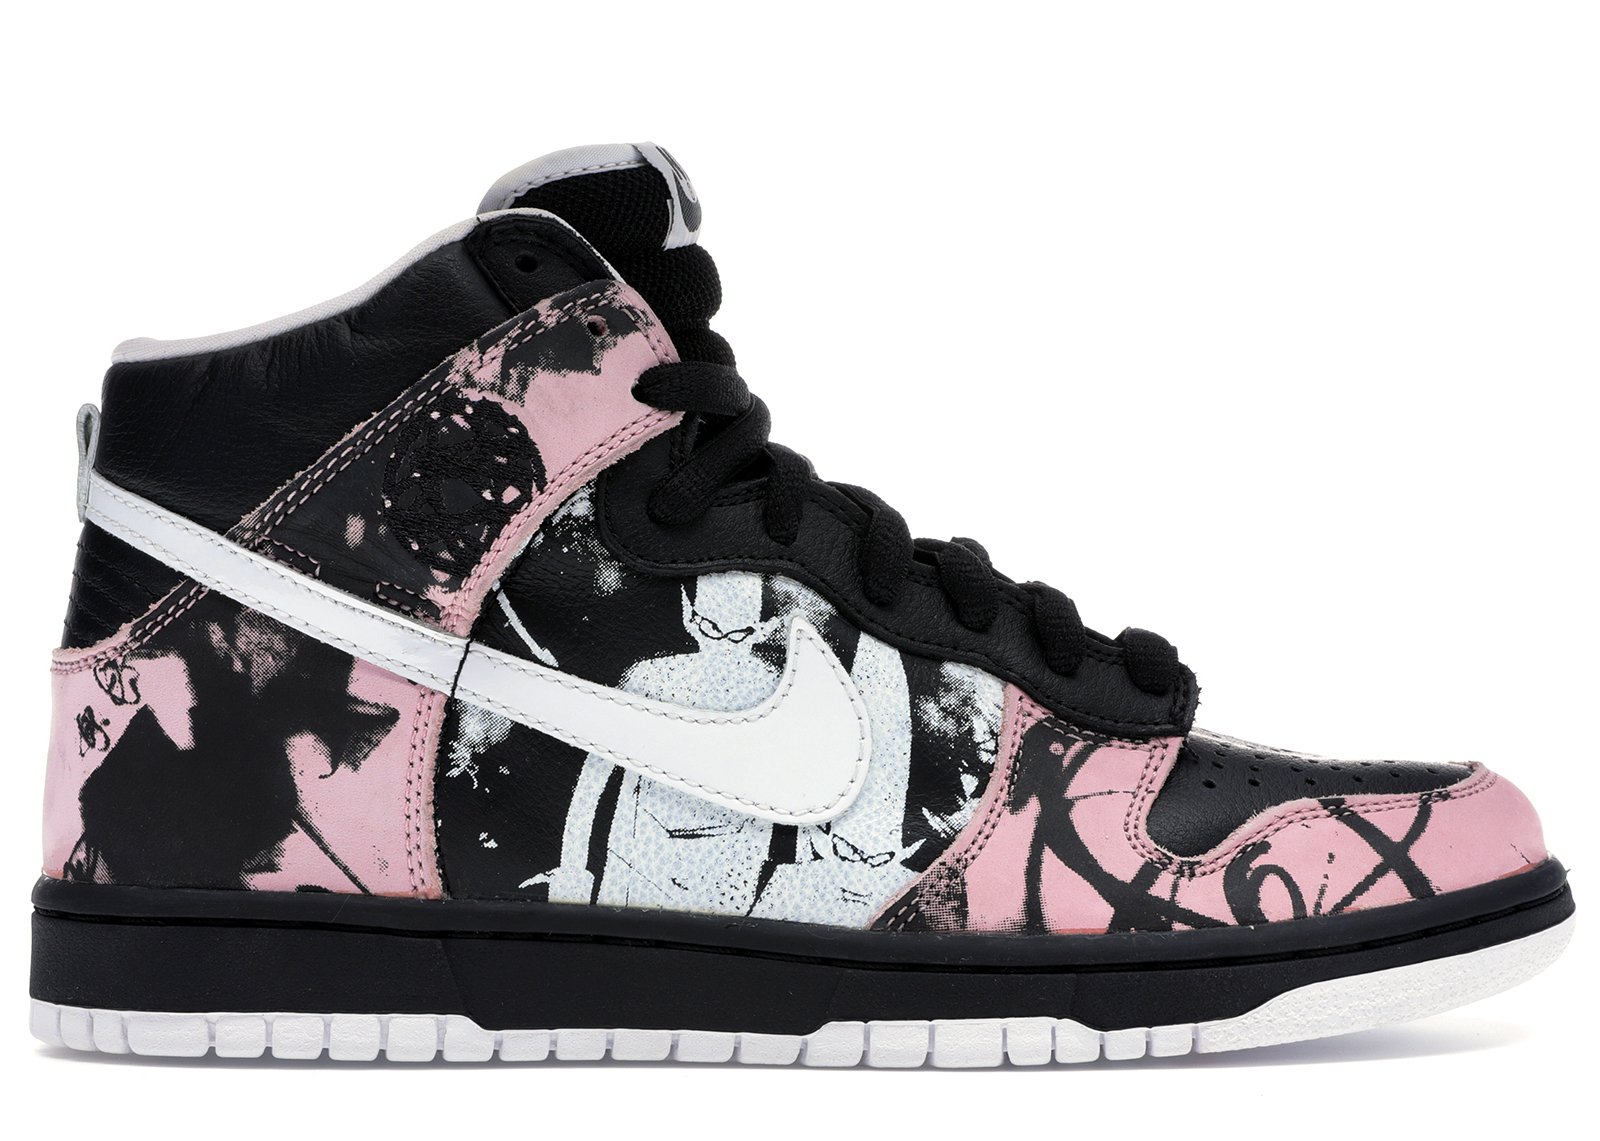 sneakers Nike Dunk High Pro SB Unkle